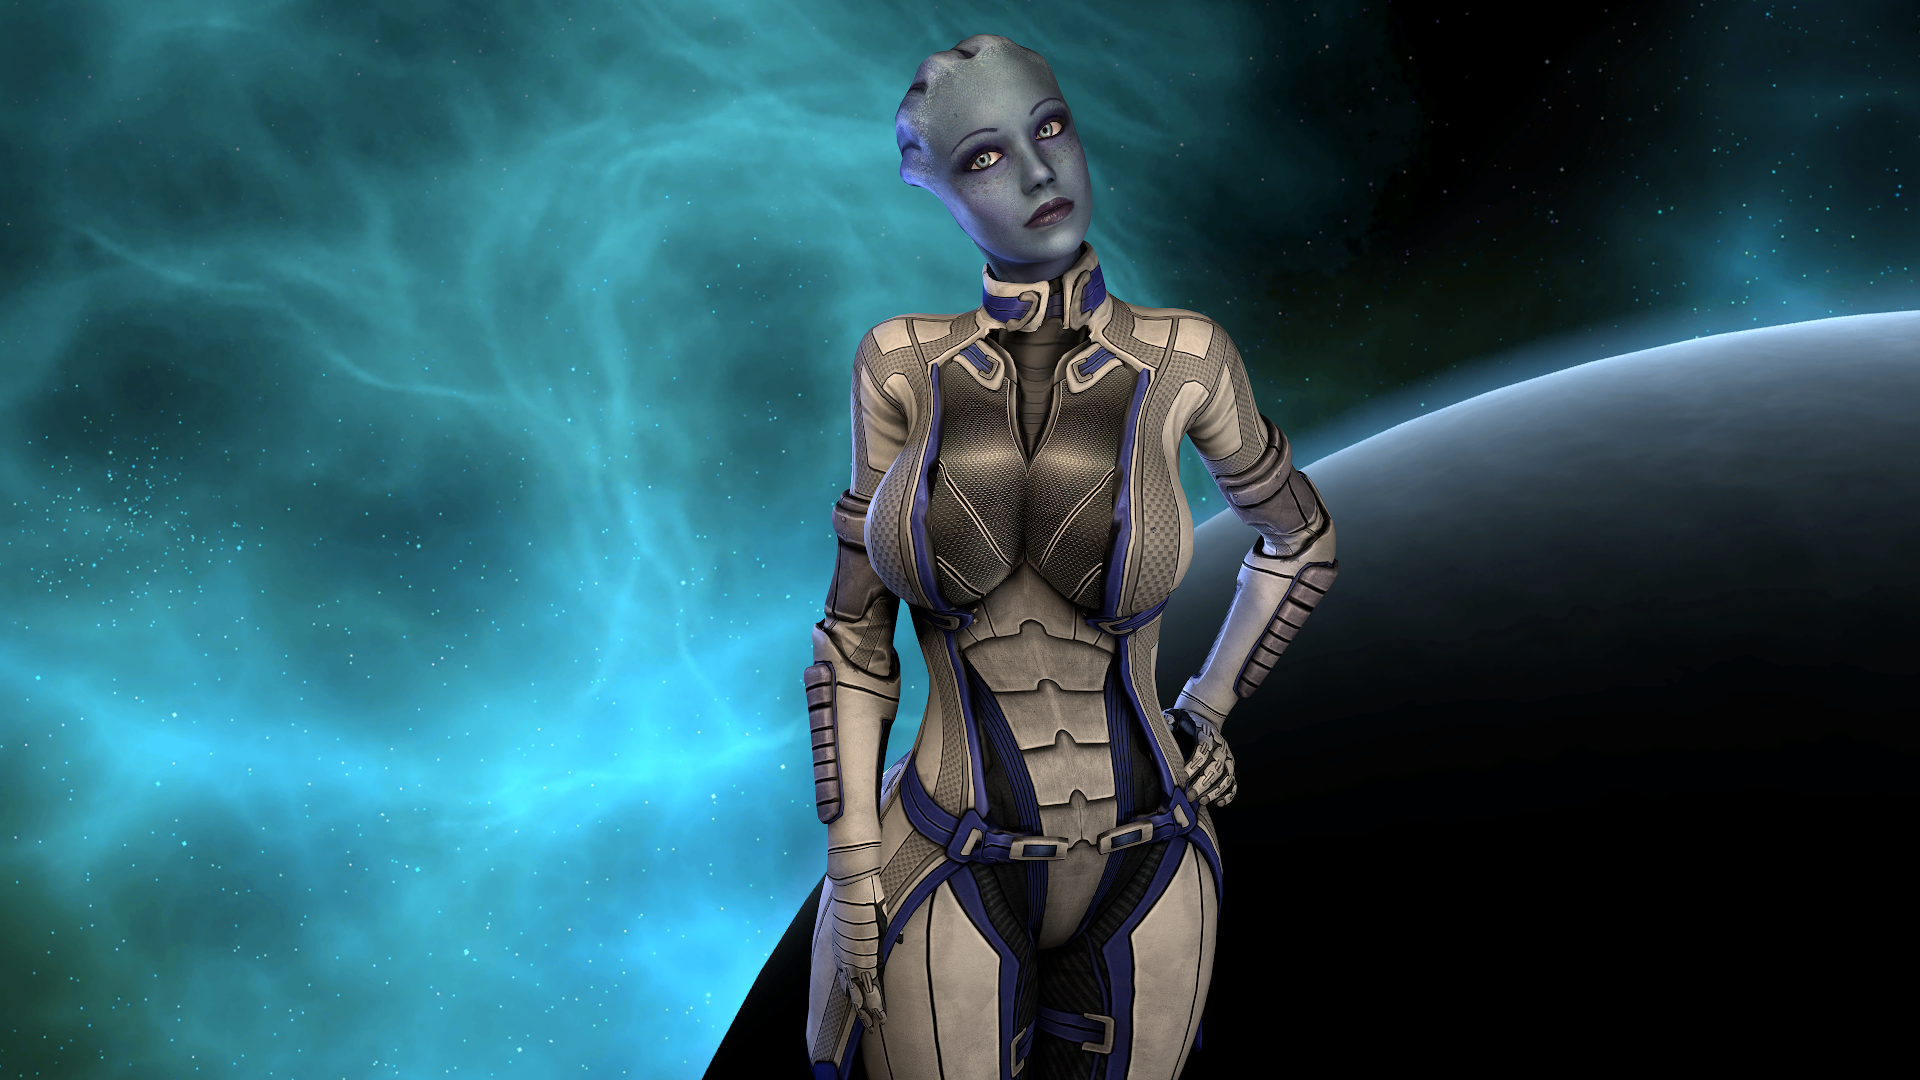 Liara In her Outfit